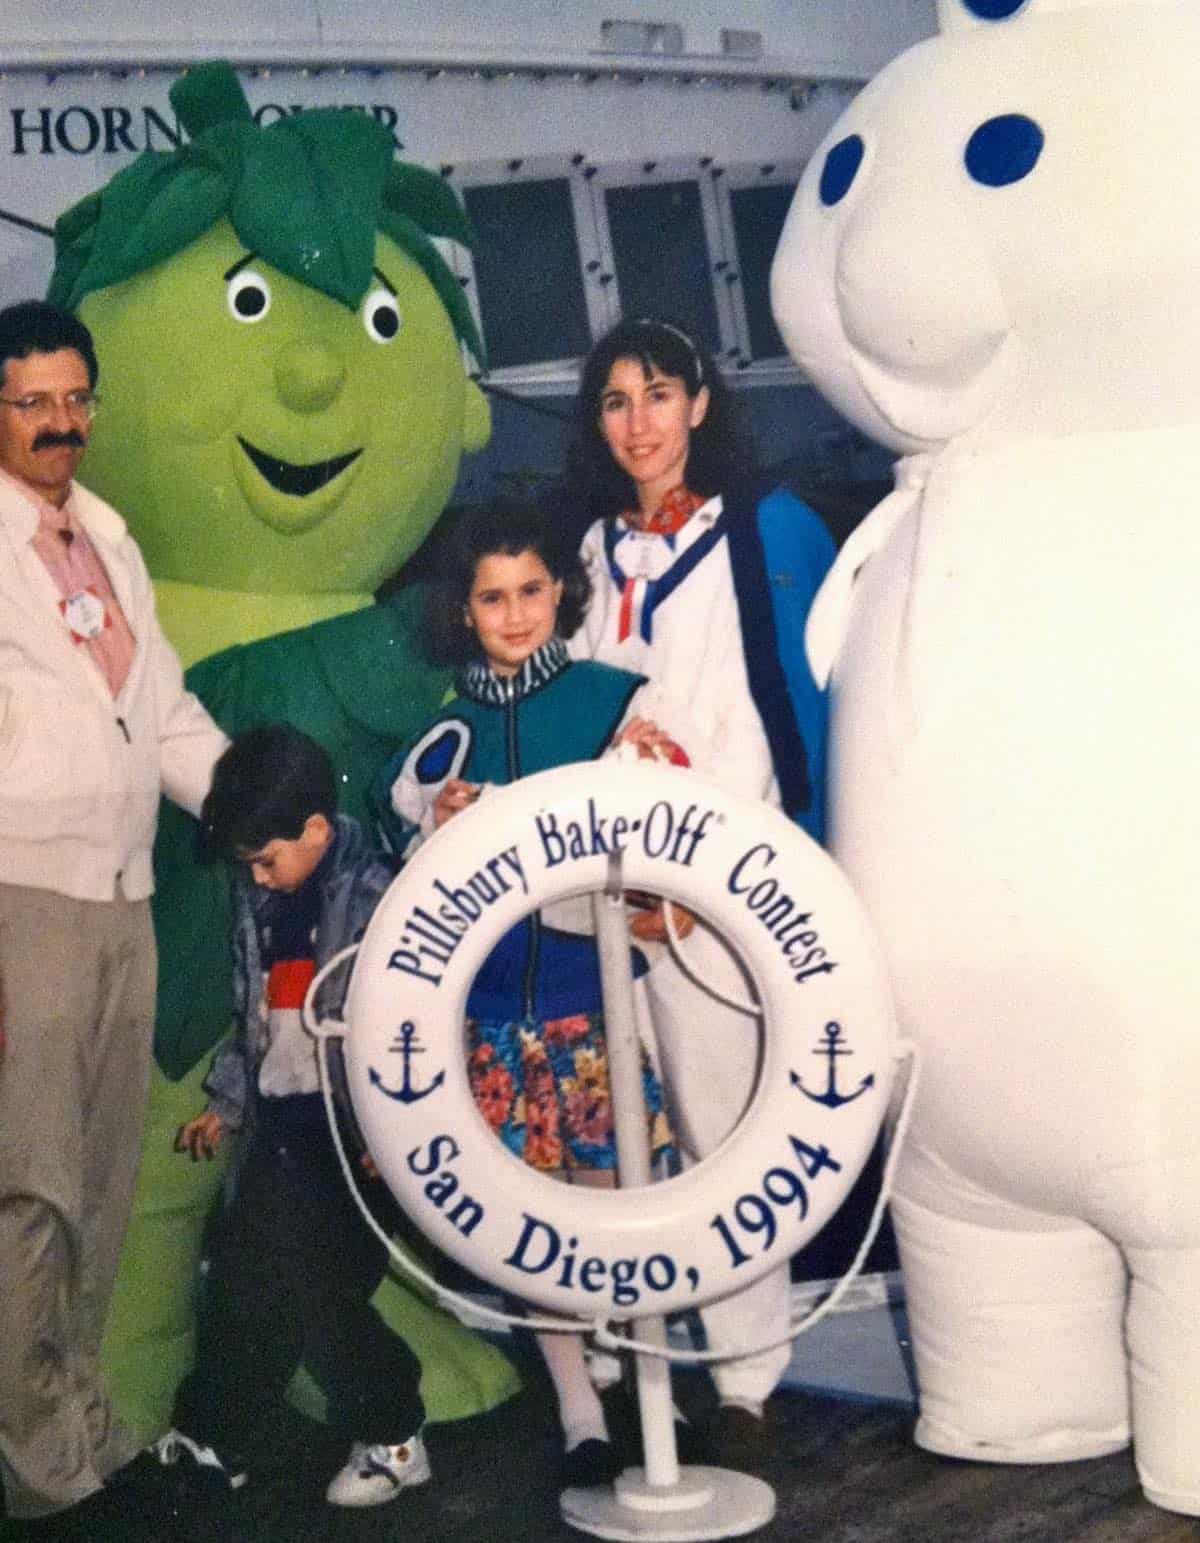 William stepping on the Green Giant's Sprout foot at the Pillsbury bake0ff with my family and doughboy